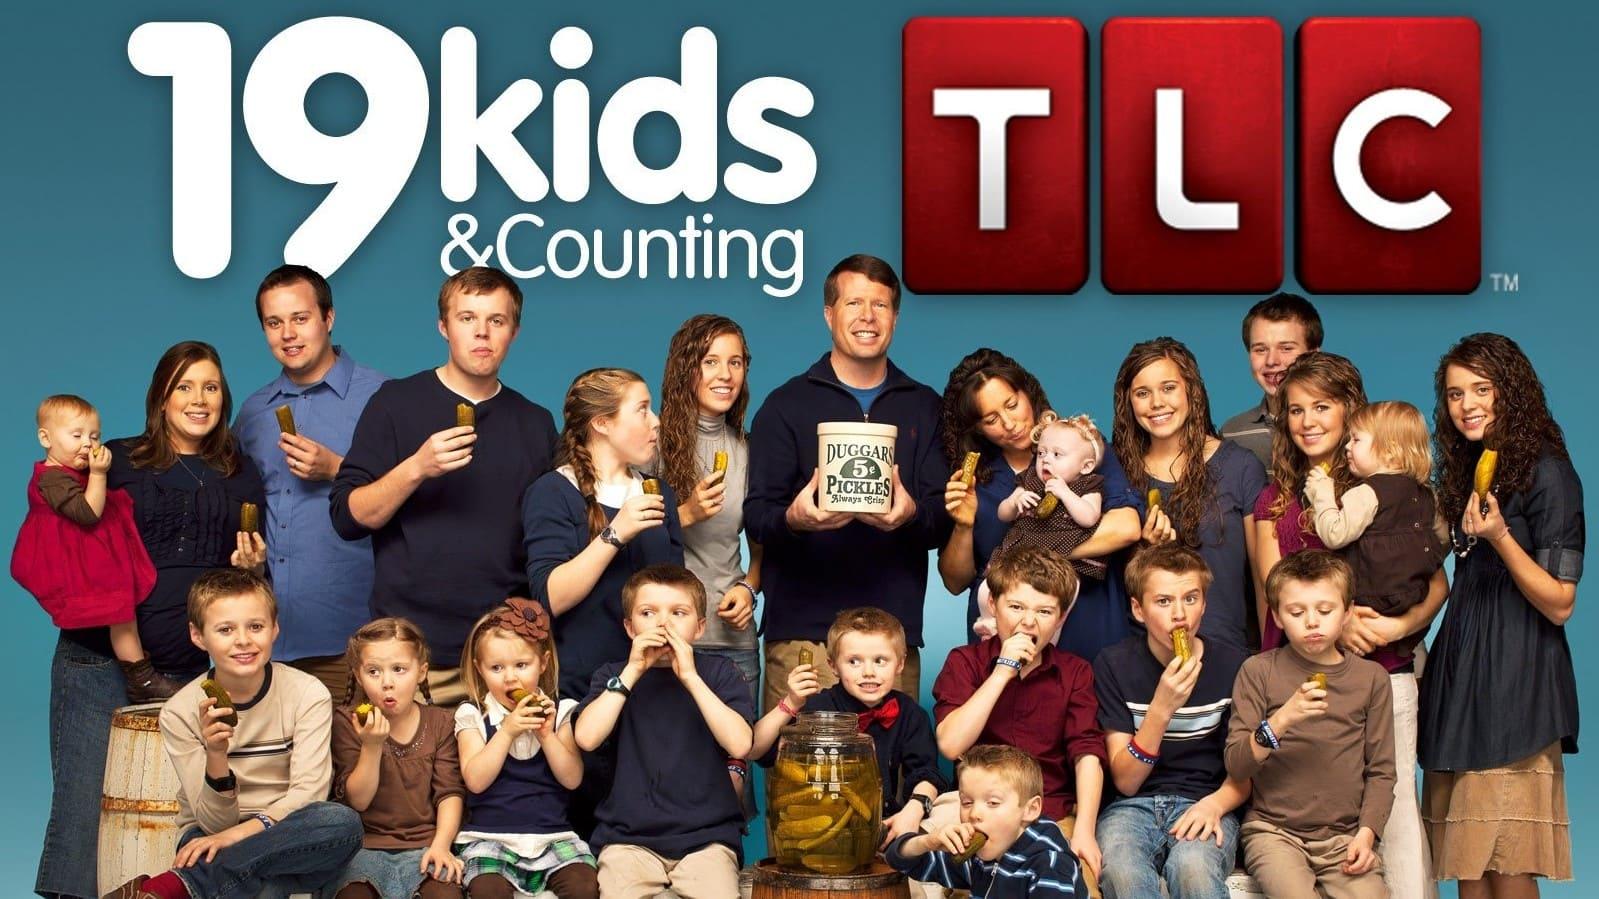 19 Kids and Counting backdrop